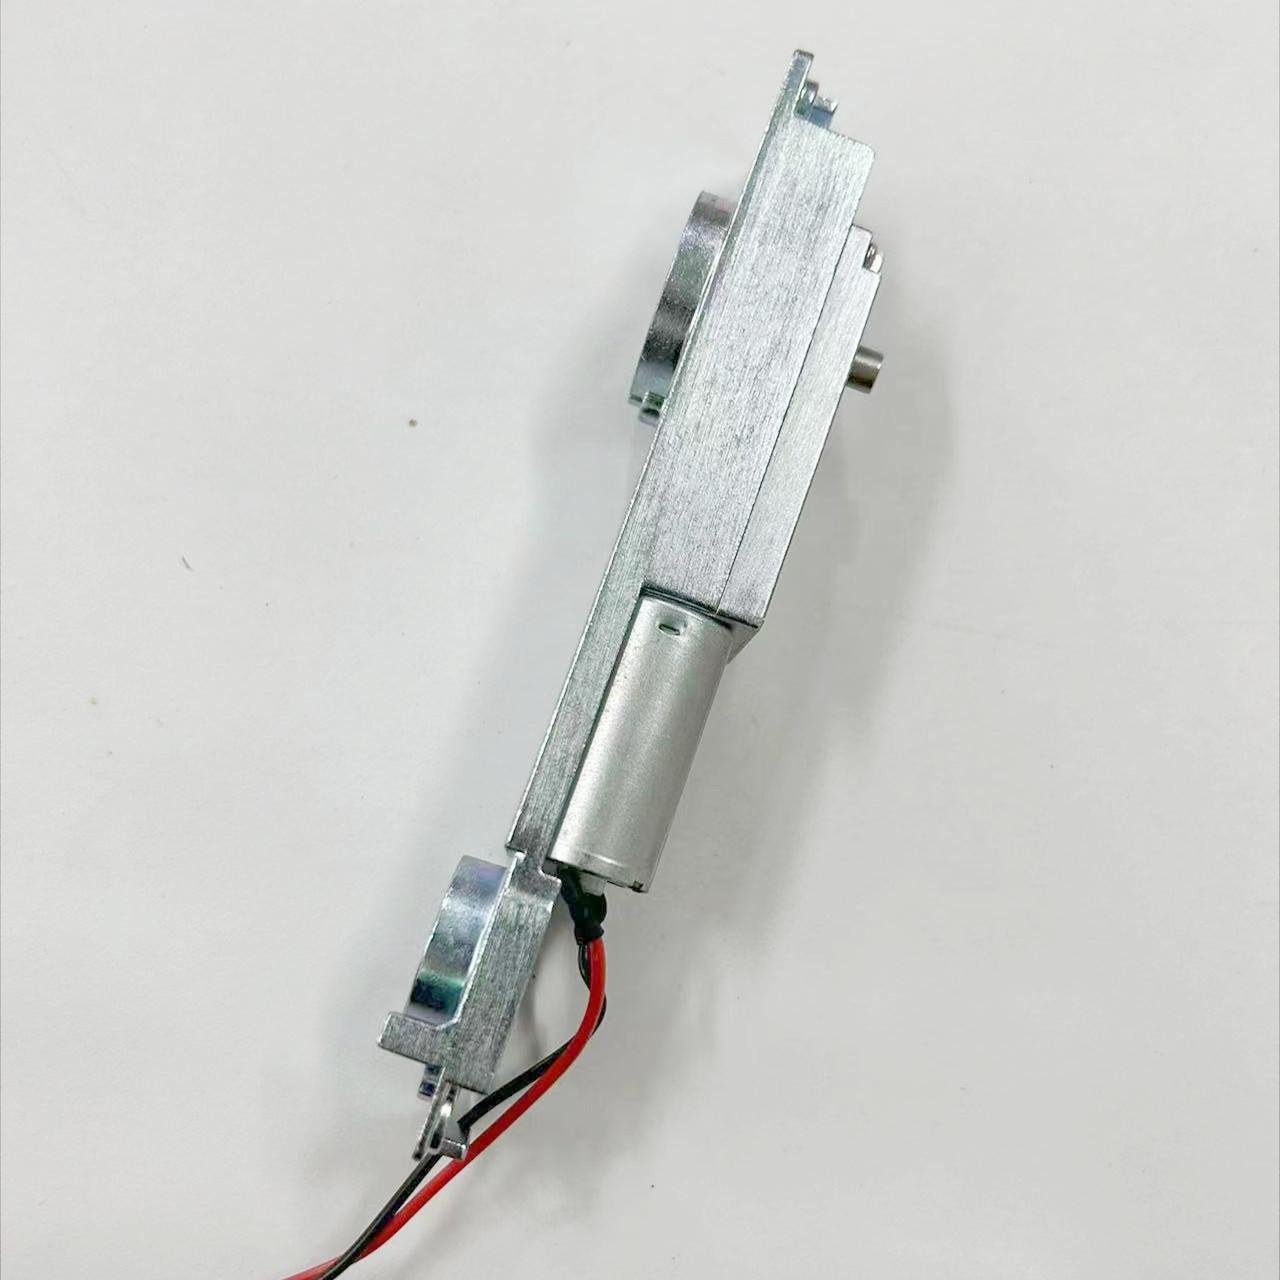 Geared motors are used for fingerprint locks for doors and windows 4